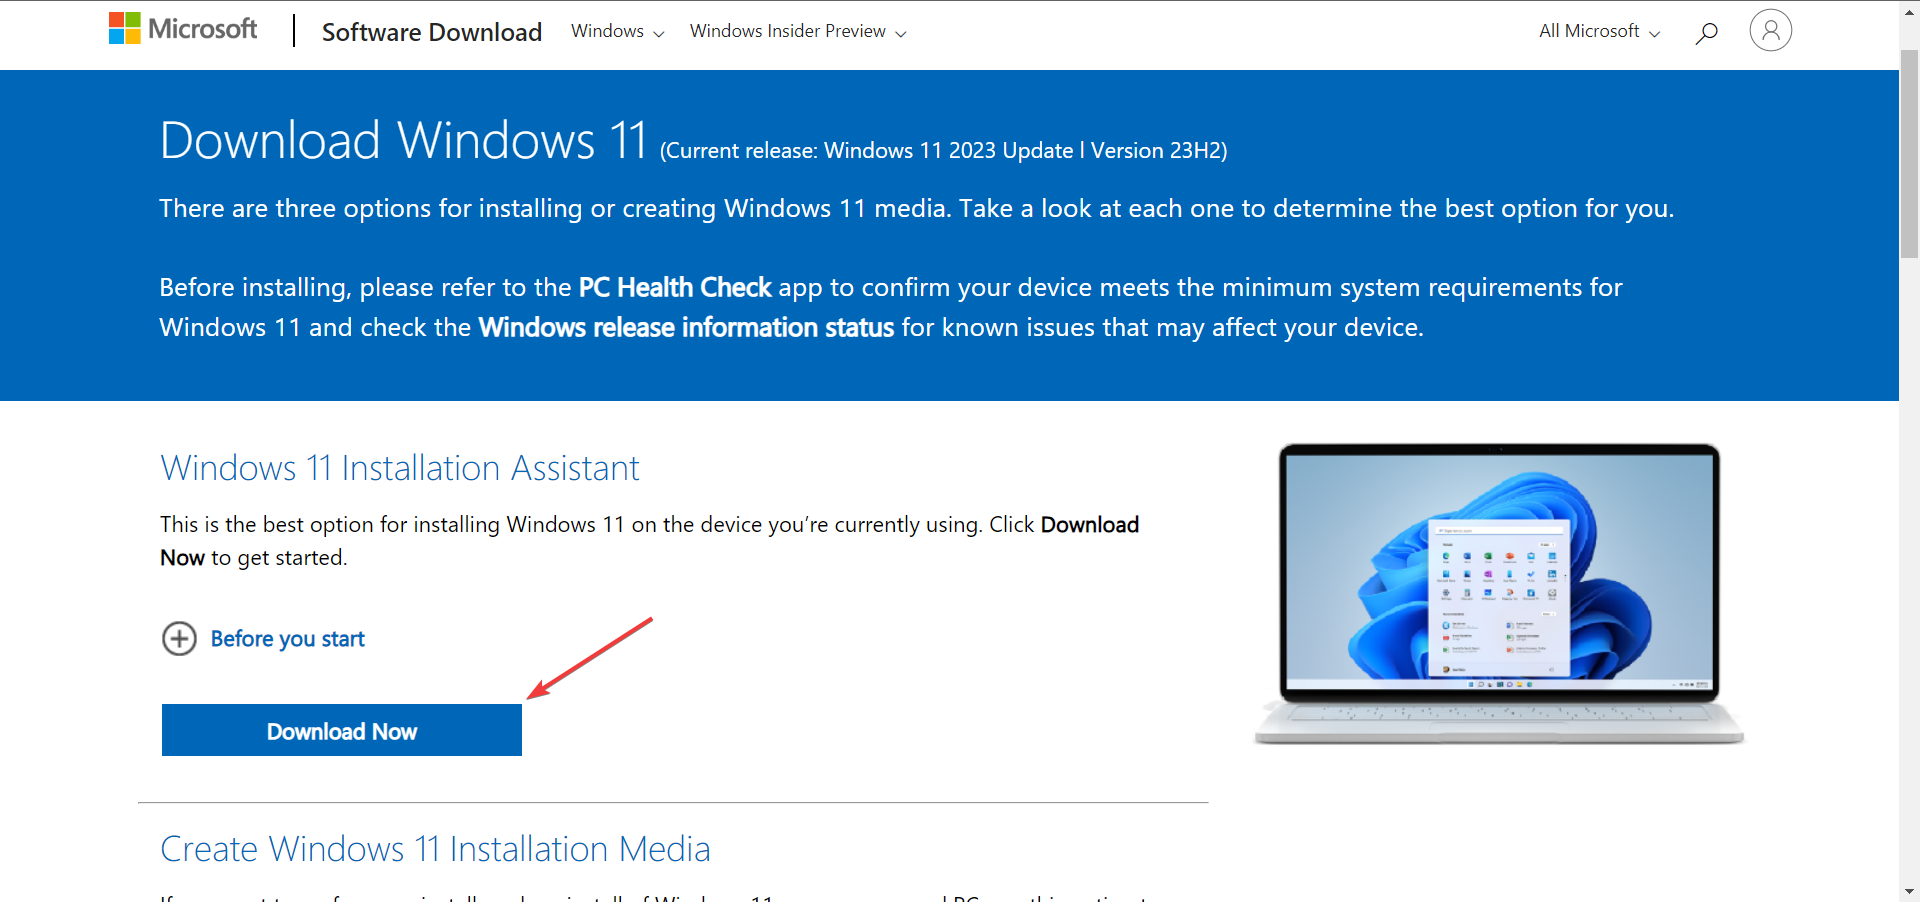 Windows 11 23H2 — ISO Download & Install (2023) 